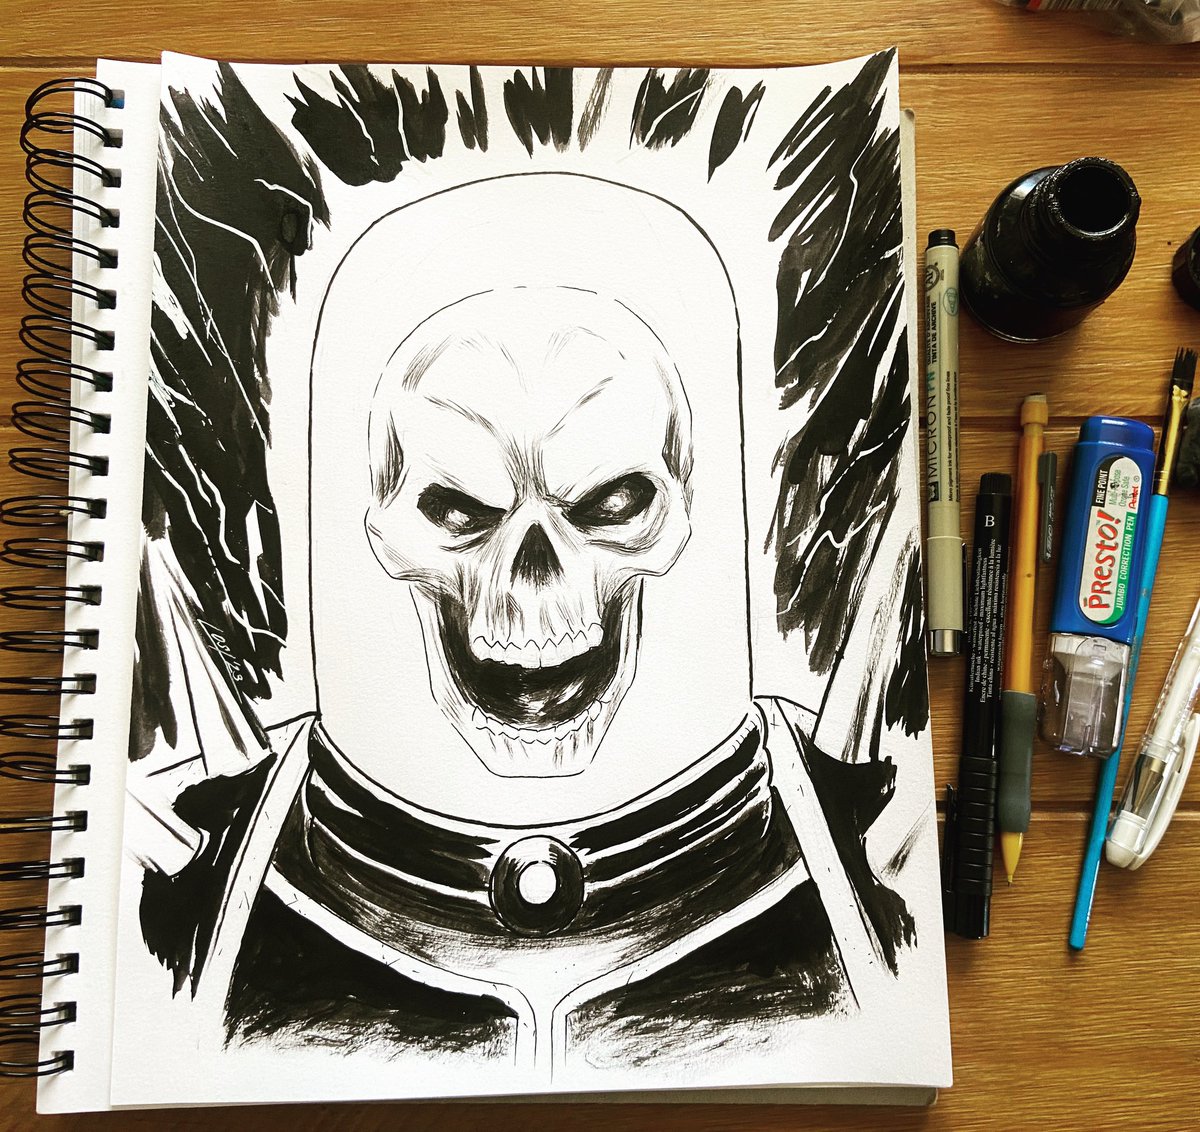 Up for grabs: Cosmic Ghostrider! I did a sketchcard commission of him and thought he was a lot of fun to draw, so I drew him again as a head sketch. $30+shipping, local pick up, or SDCC. #CosmicGhostrider #Ghostrider #CommissionsOpen #SDCC